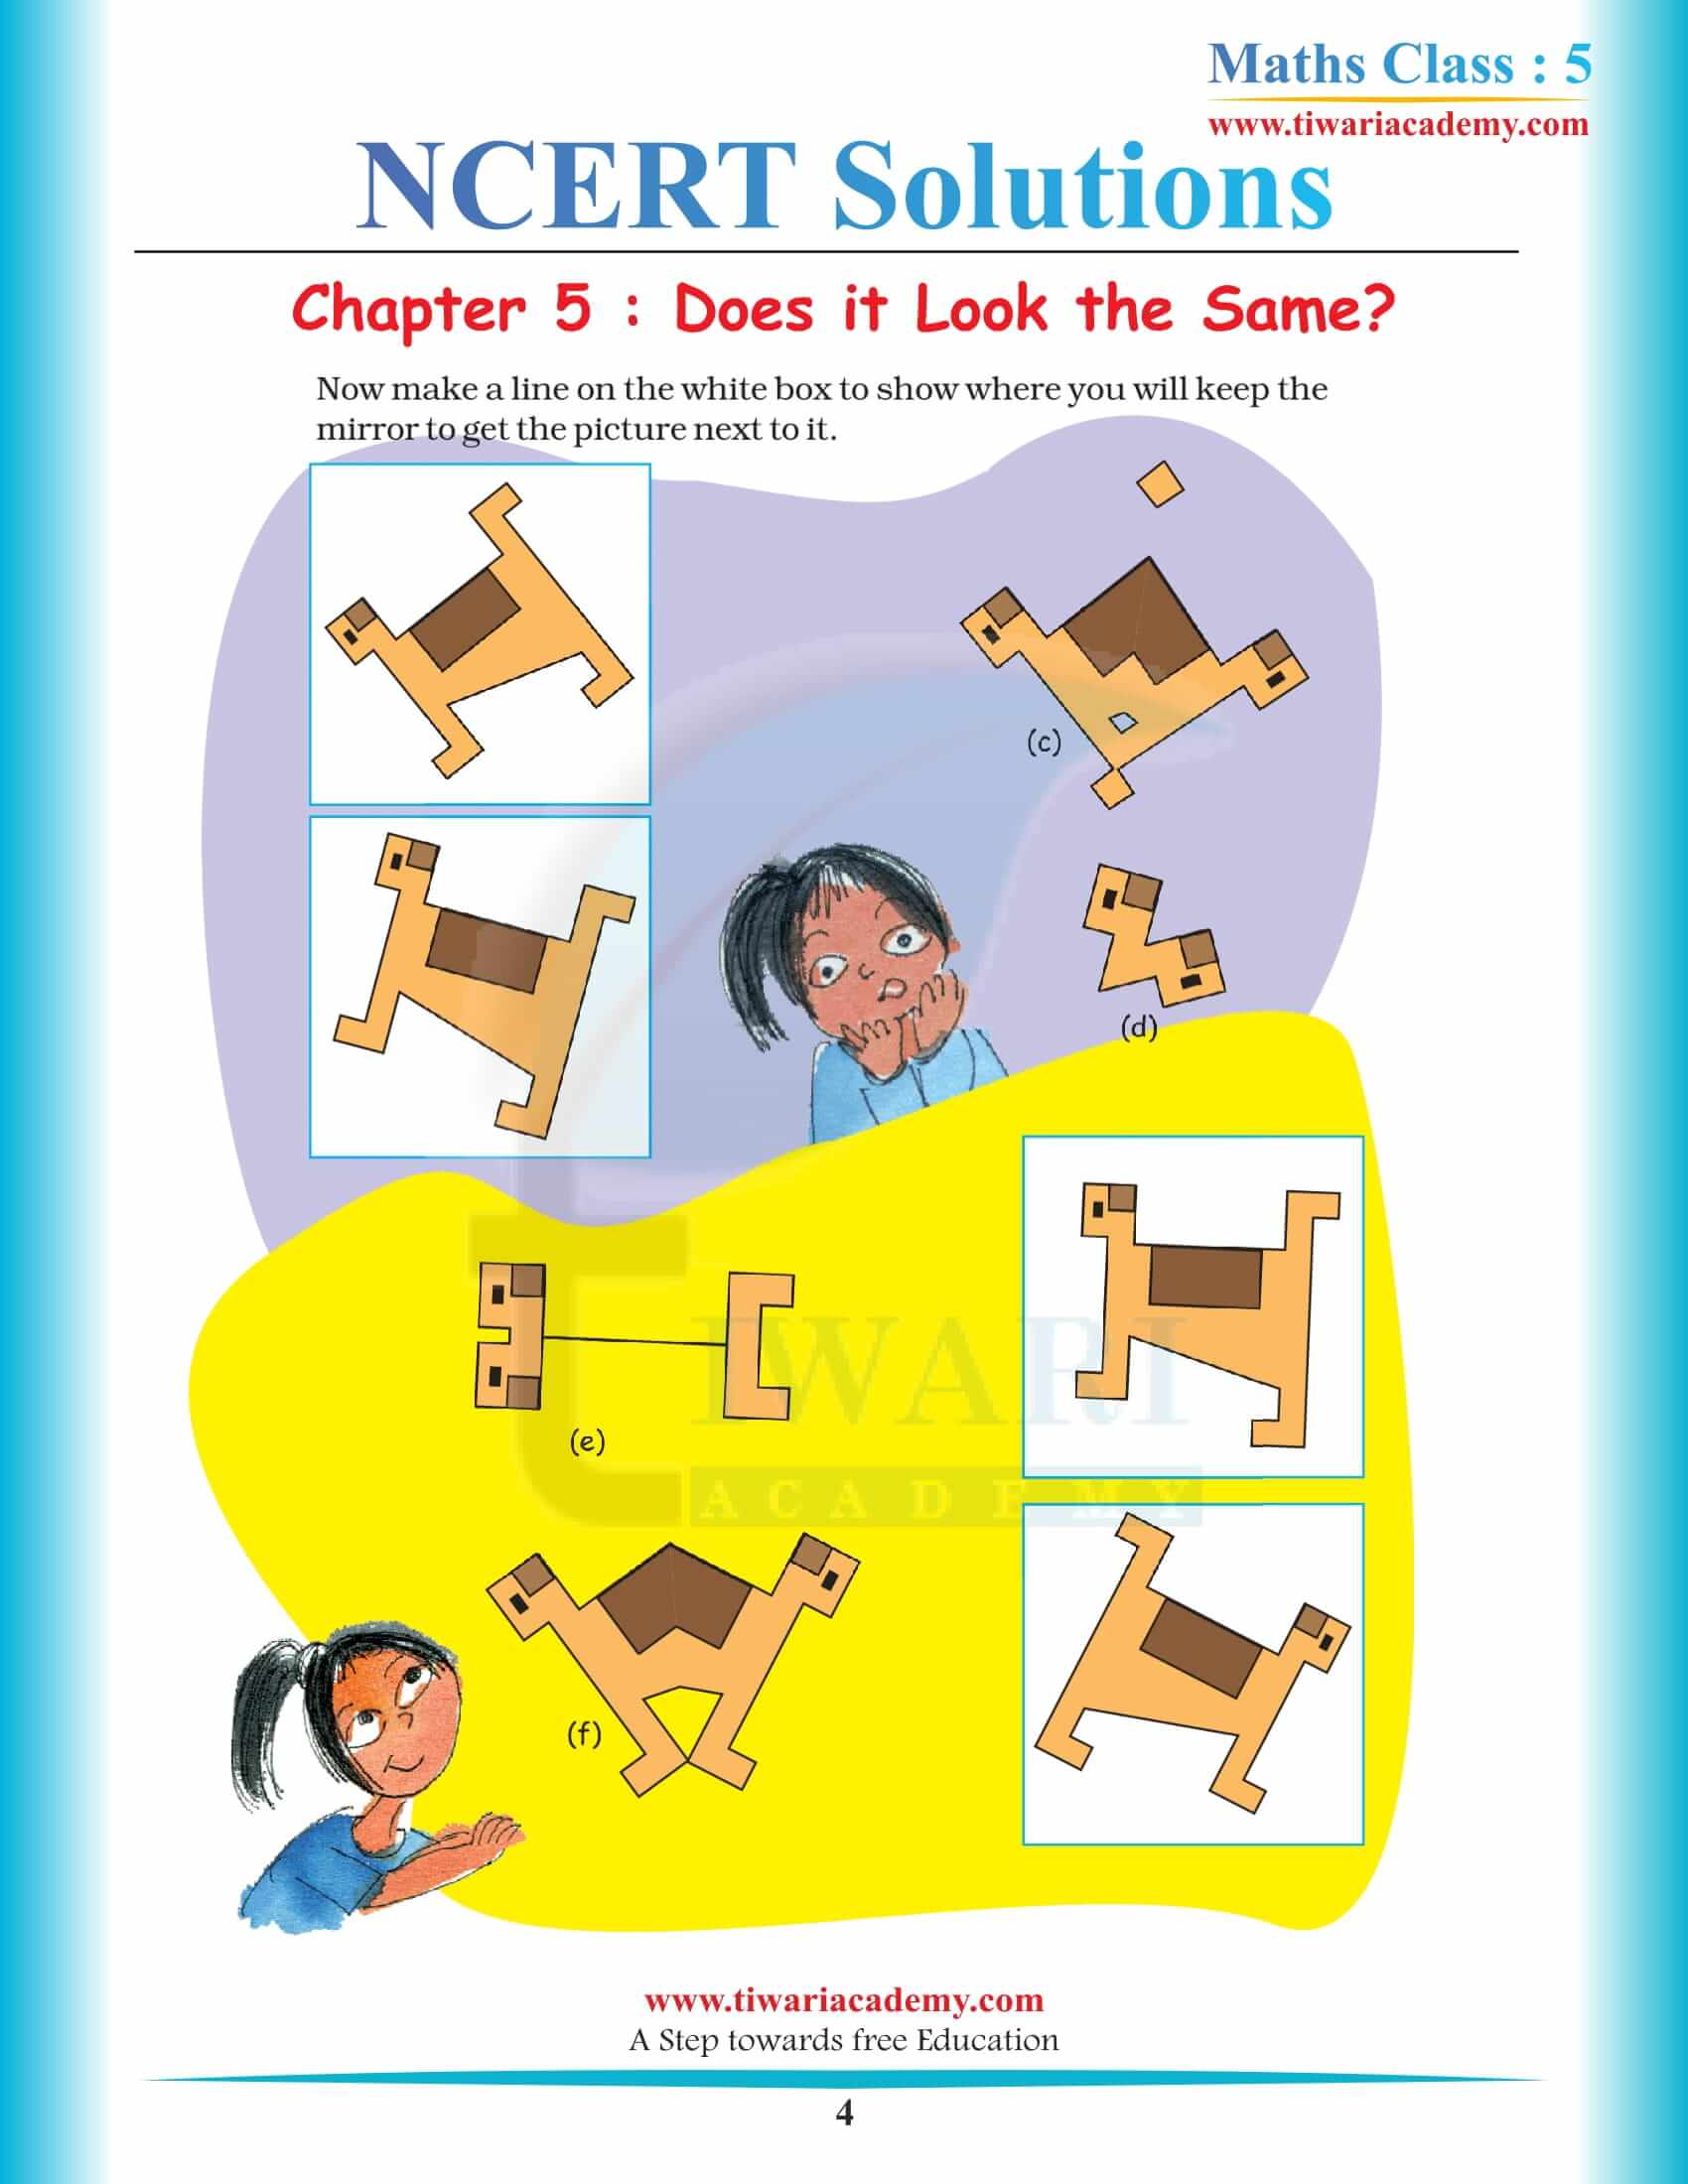 NCERT Solutions for Class 5 Maths Chapter 5 free download